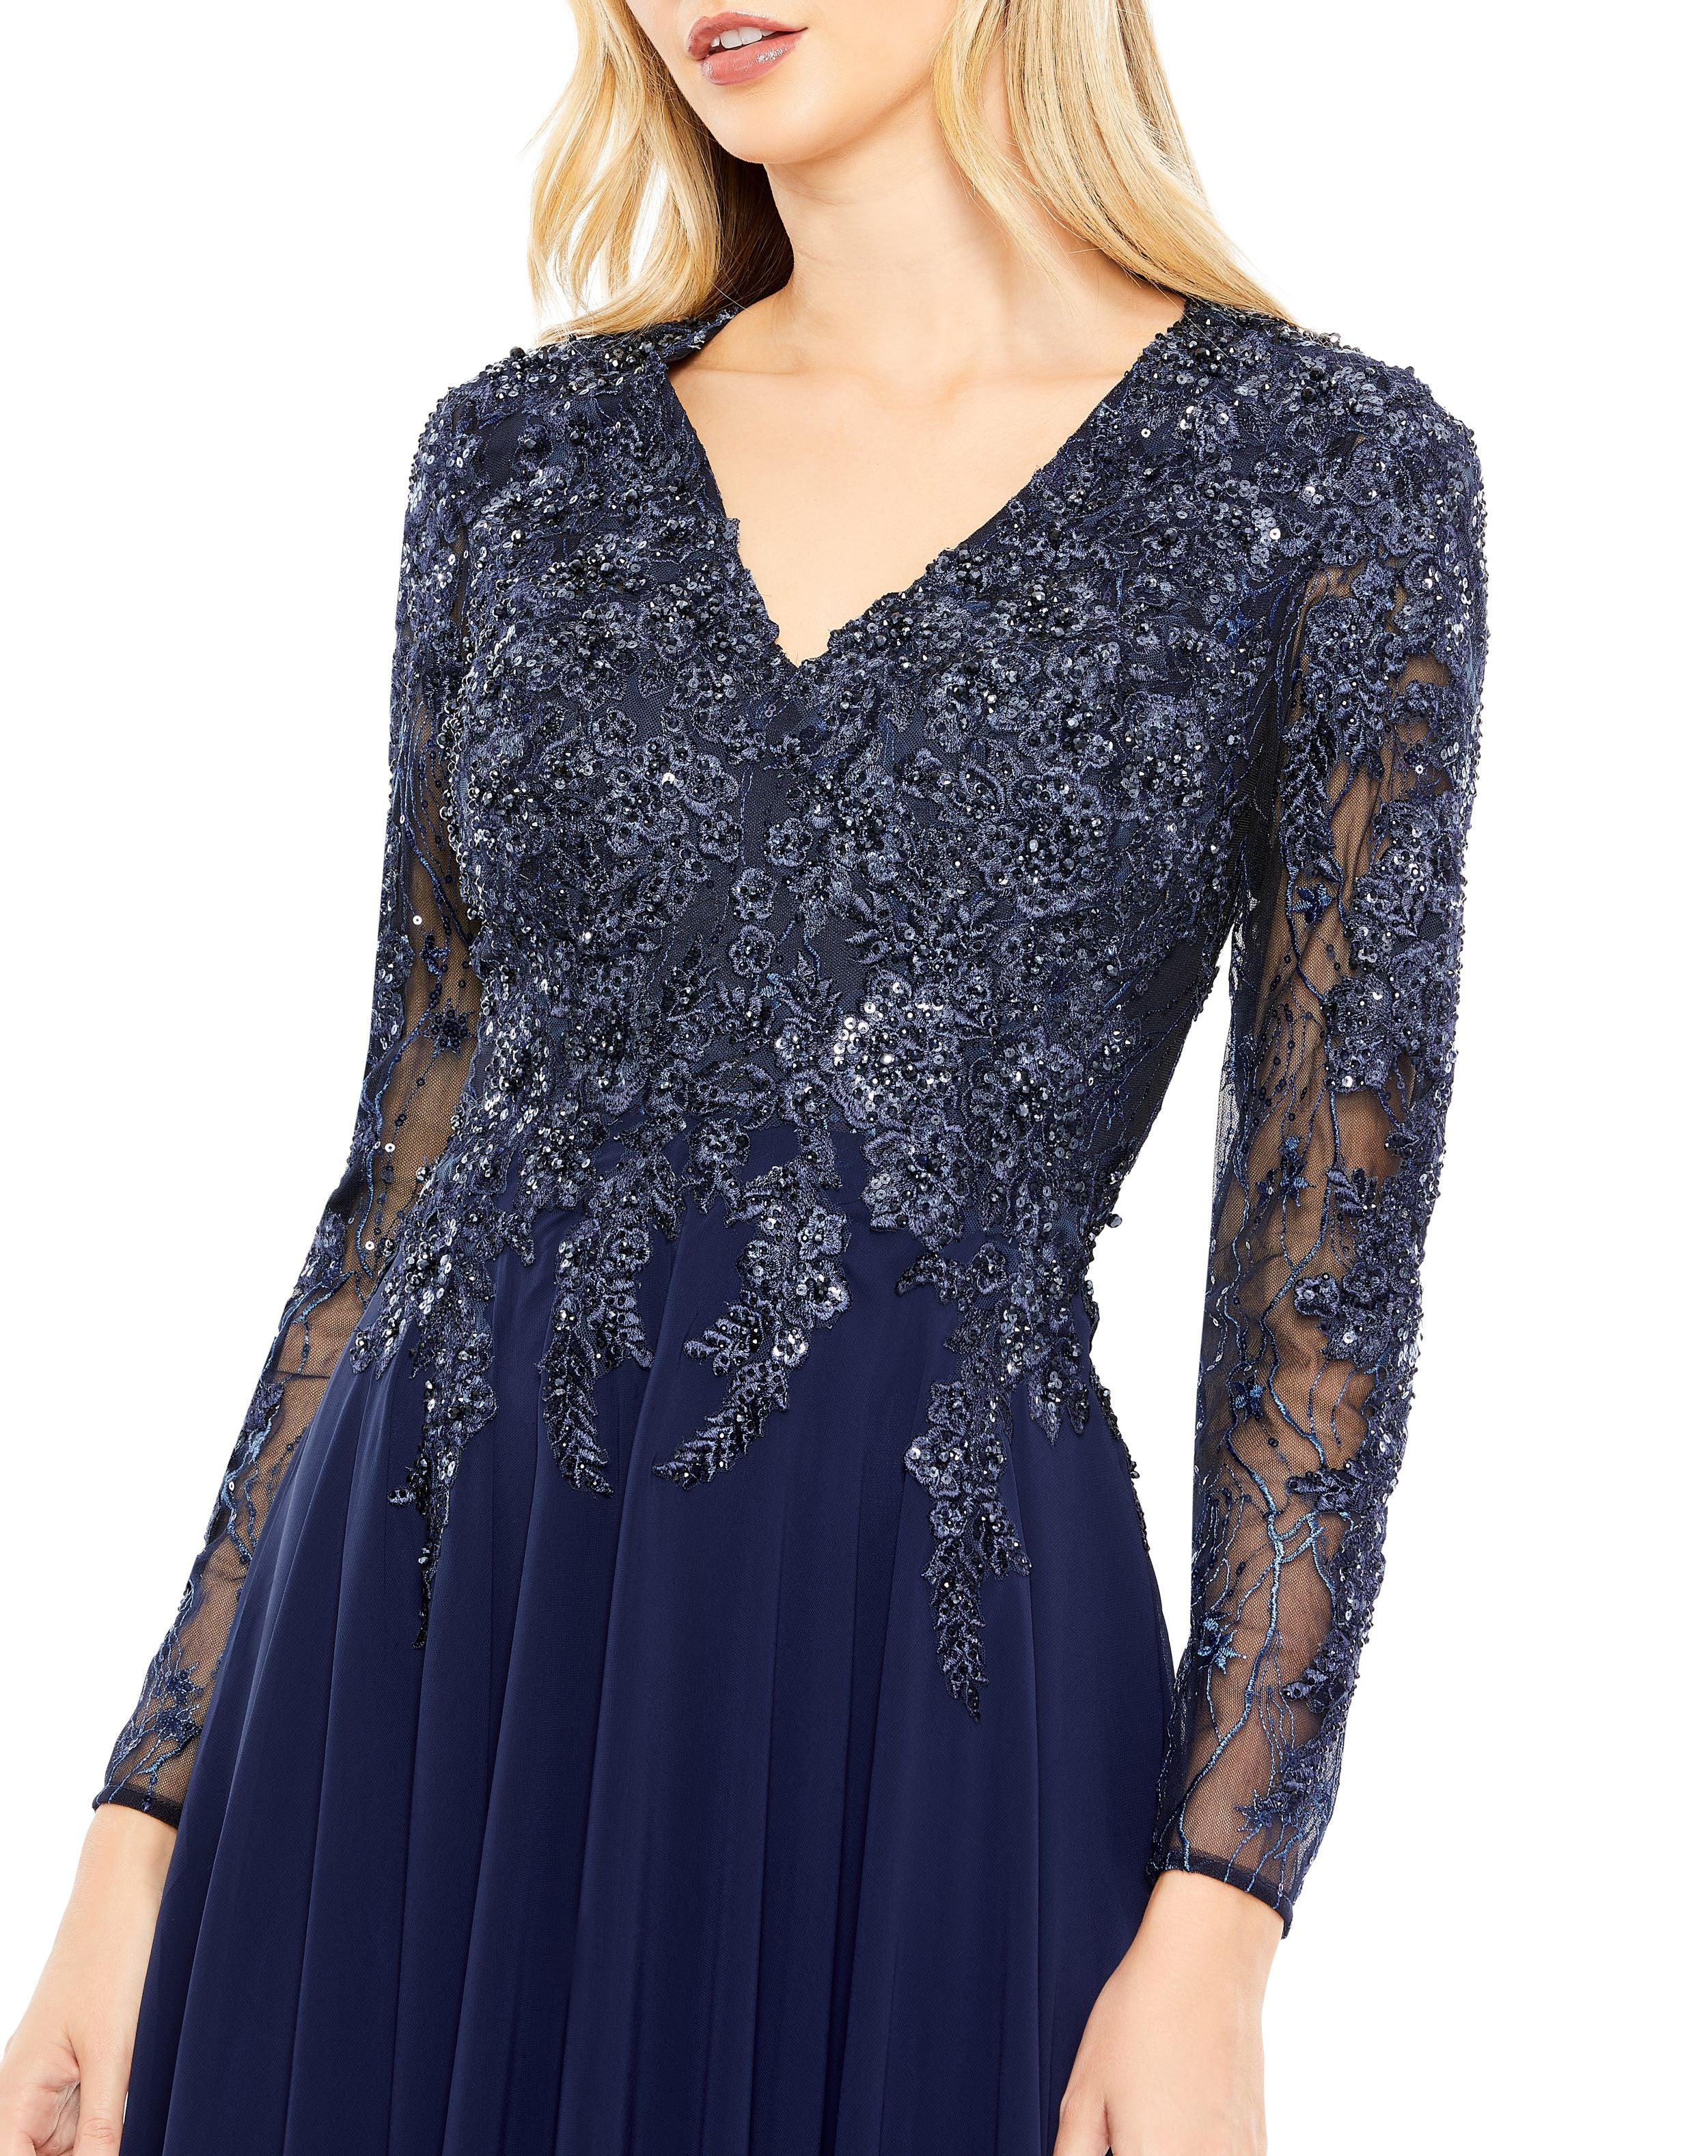 Embroidered Illusion V Neck Long Sleeve Dress – Mac Duggal